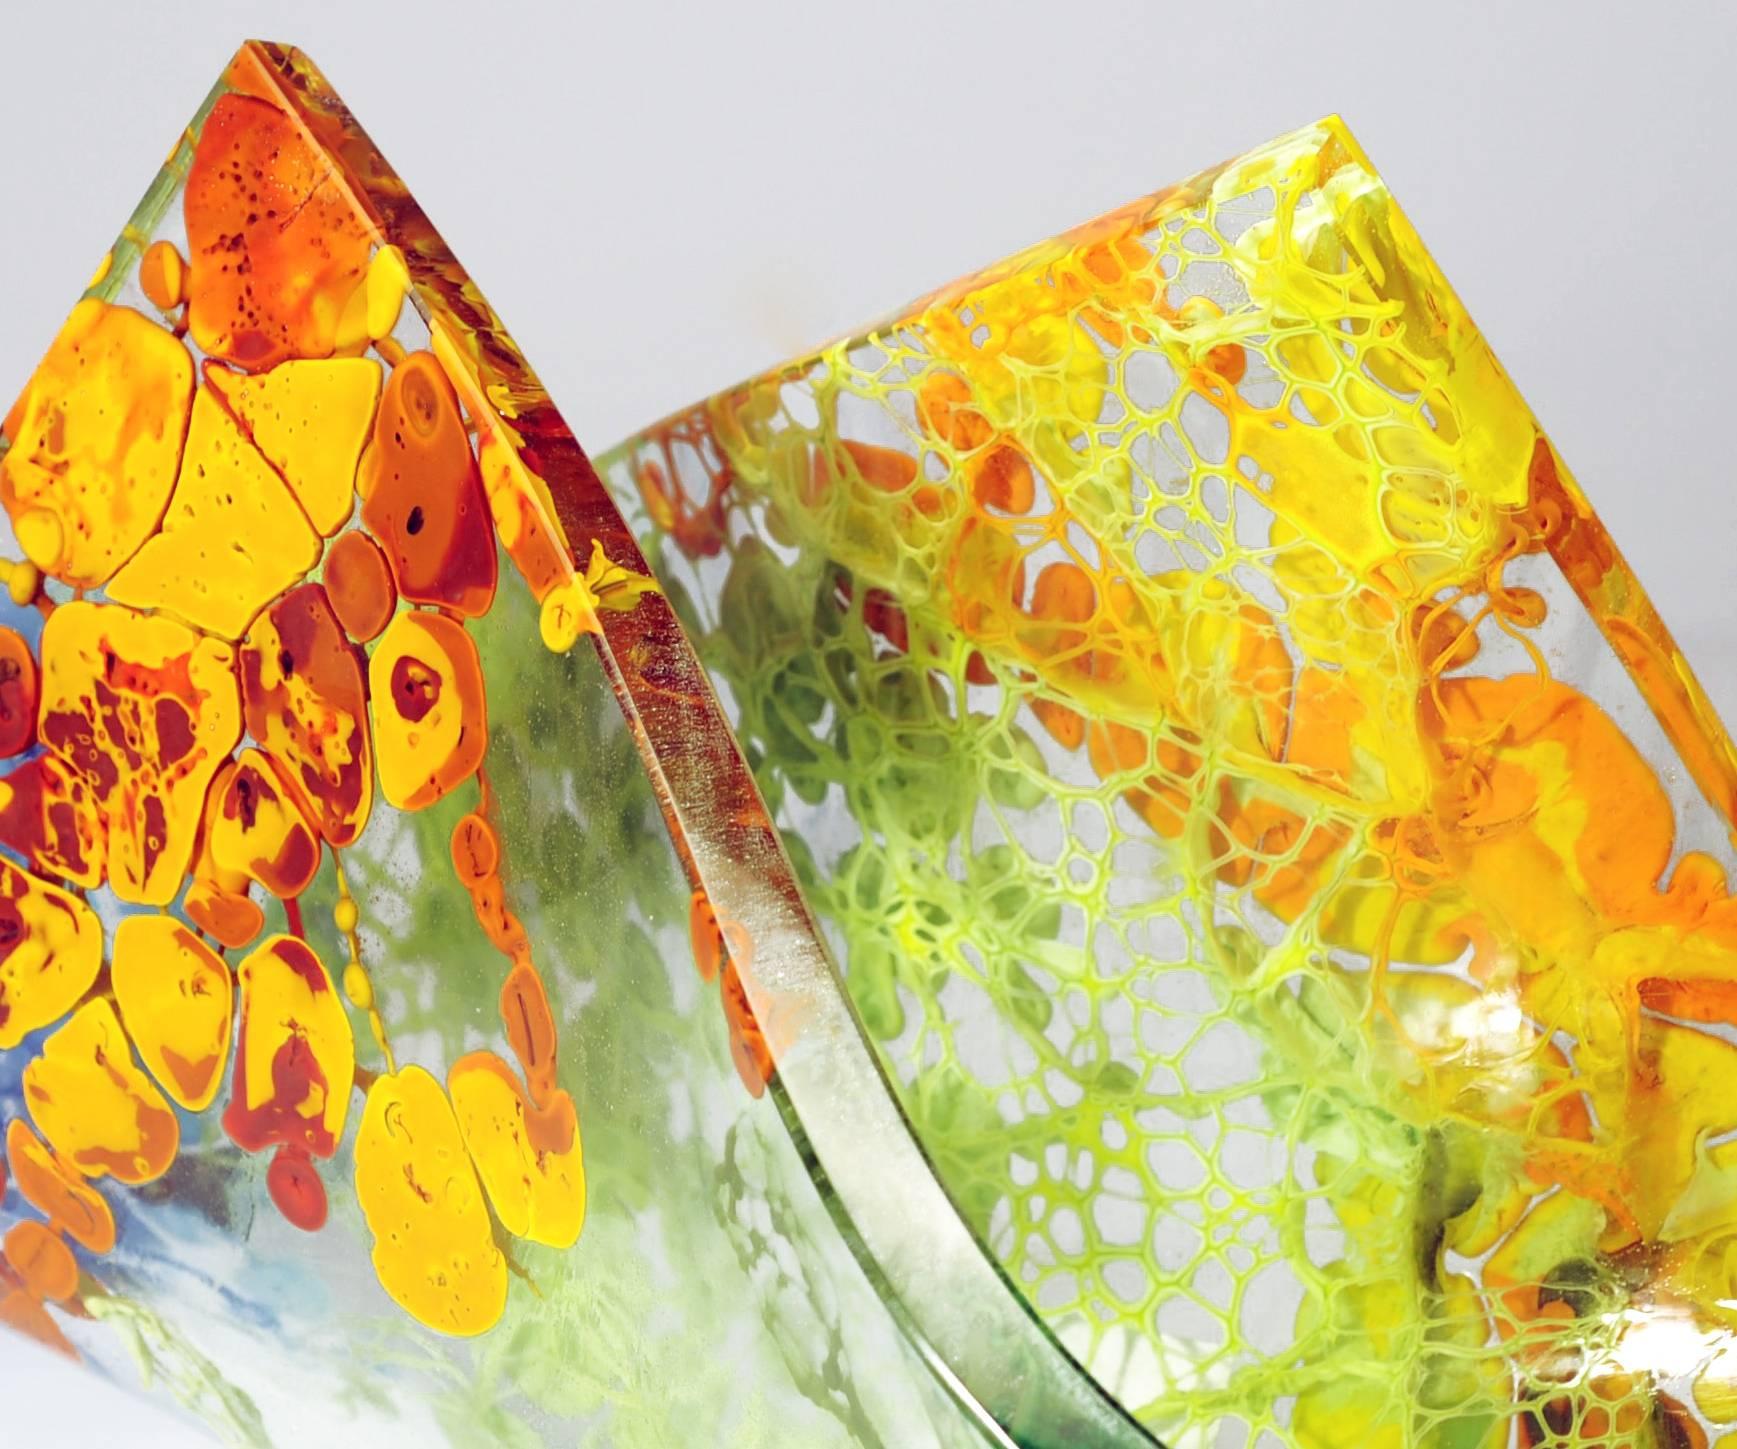 All glass sculpture perfect for a colorful touch in any space.

Born from a collision of ideologies, blending the traditional and the contemporary, with technical and artisanal methods. Under our commitment to offer the work of world-renowed